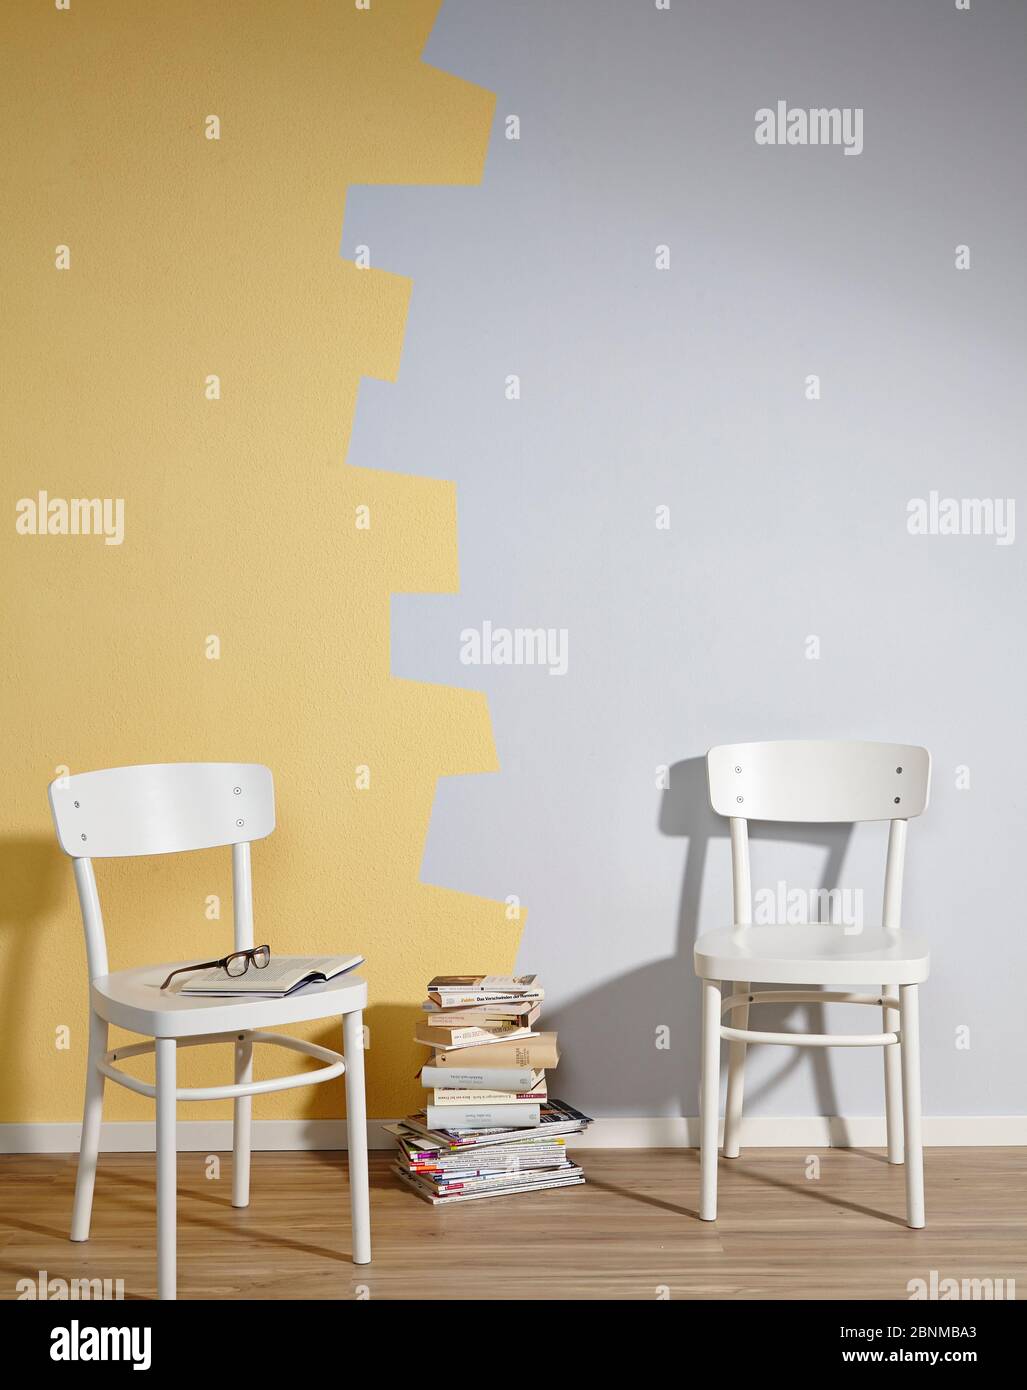 DIY wall design 03, step-by-step do-it-yourself production, various colored surfaces with wall paint and roller plaster, gray and yellow, final photo 01 in the living room with decoration Stock Photo